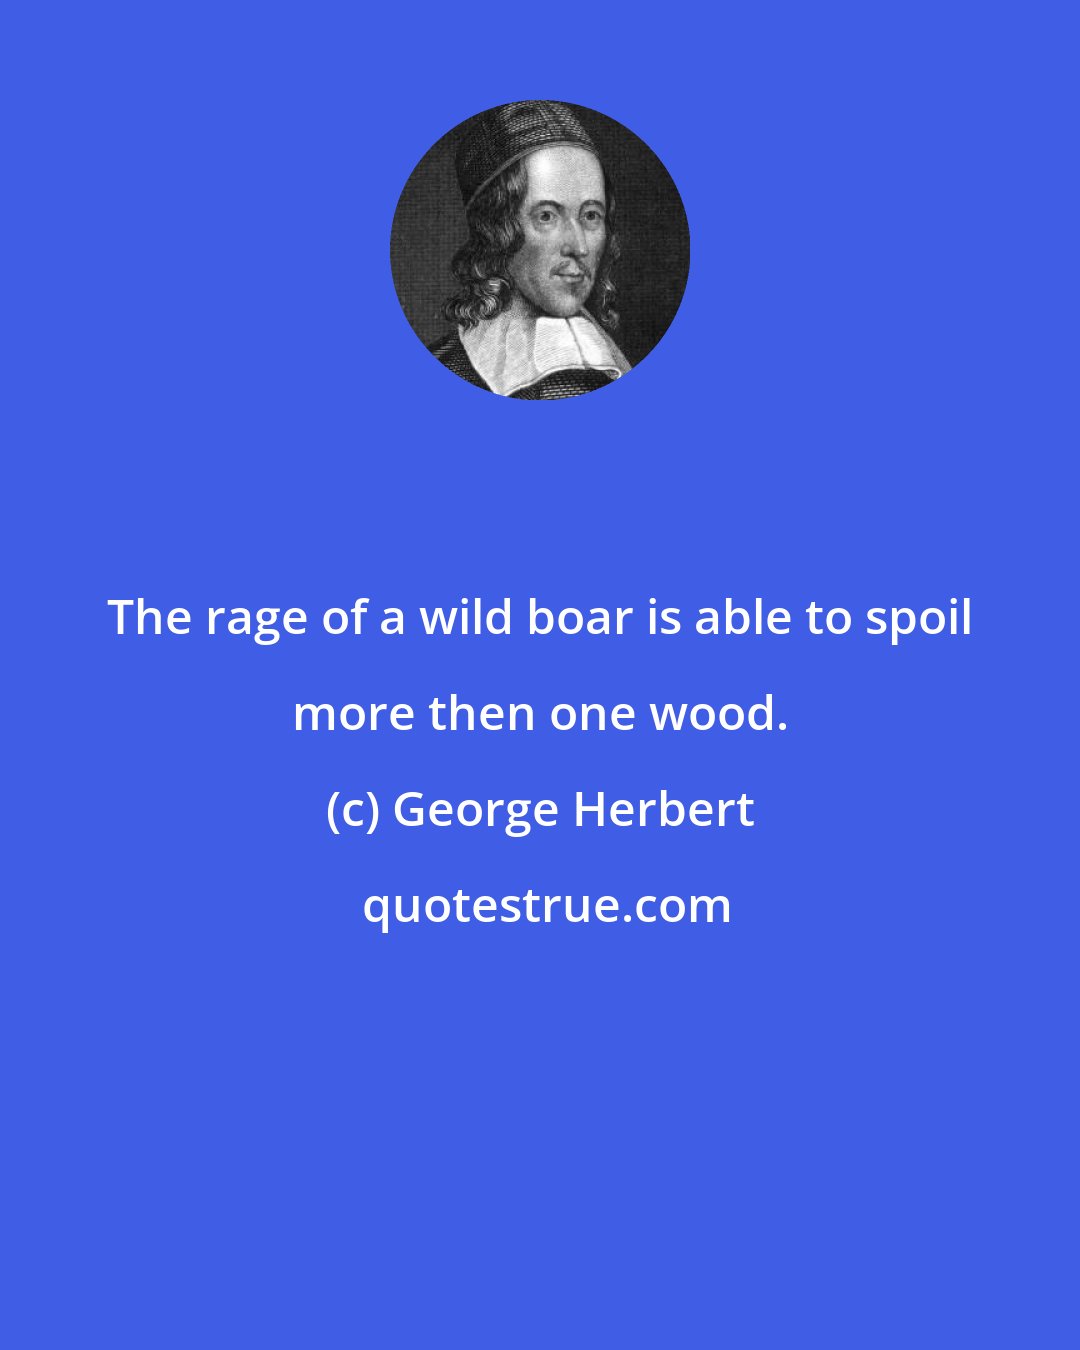 George Herbert: The rage of a wild boar is able to spoil more then one wood.